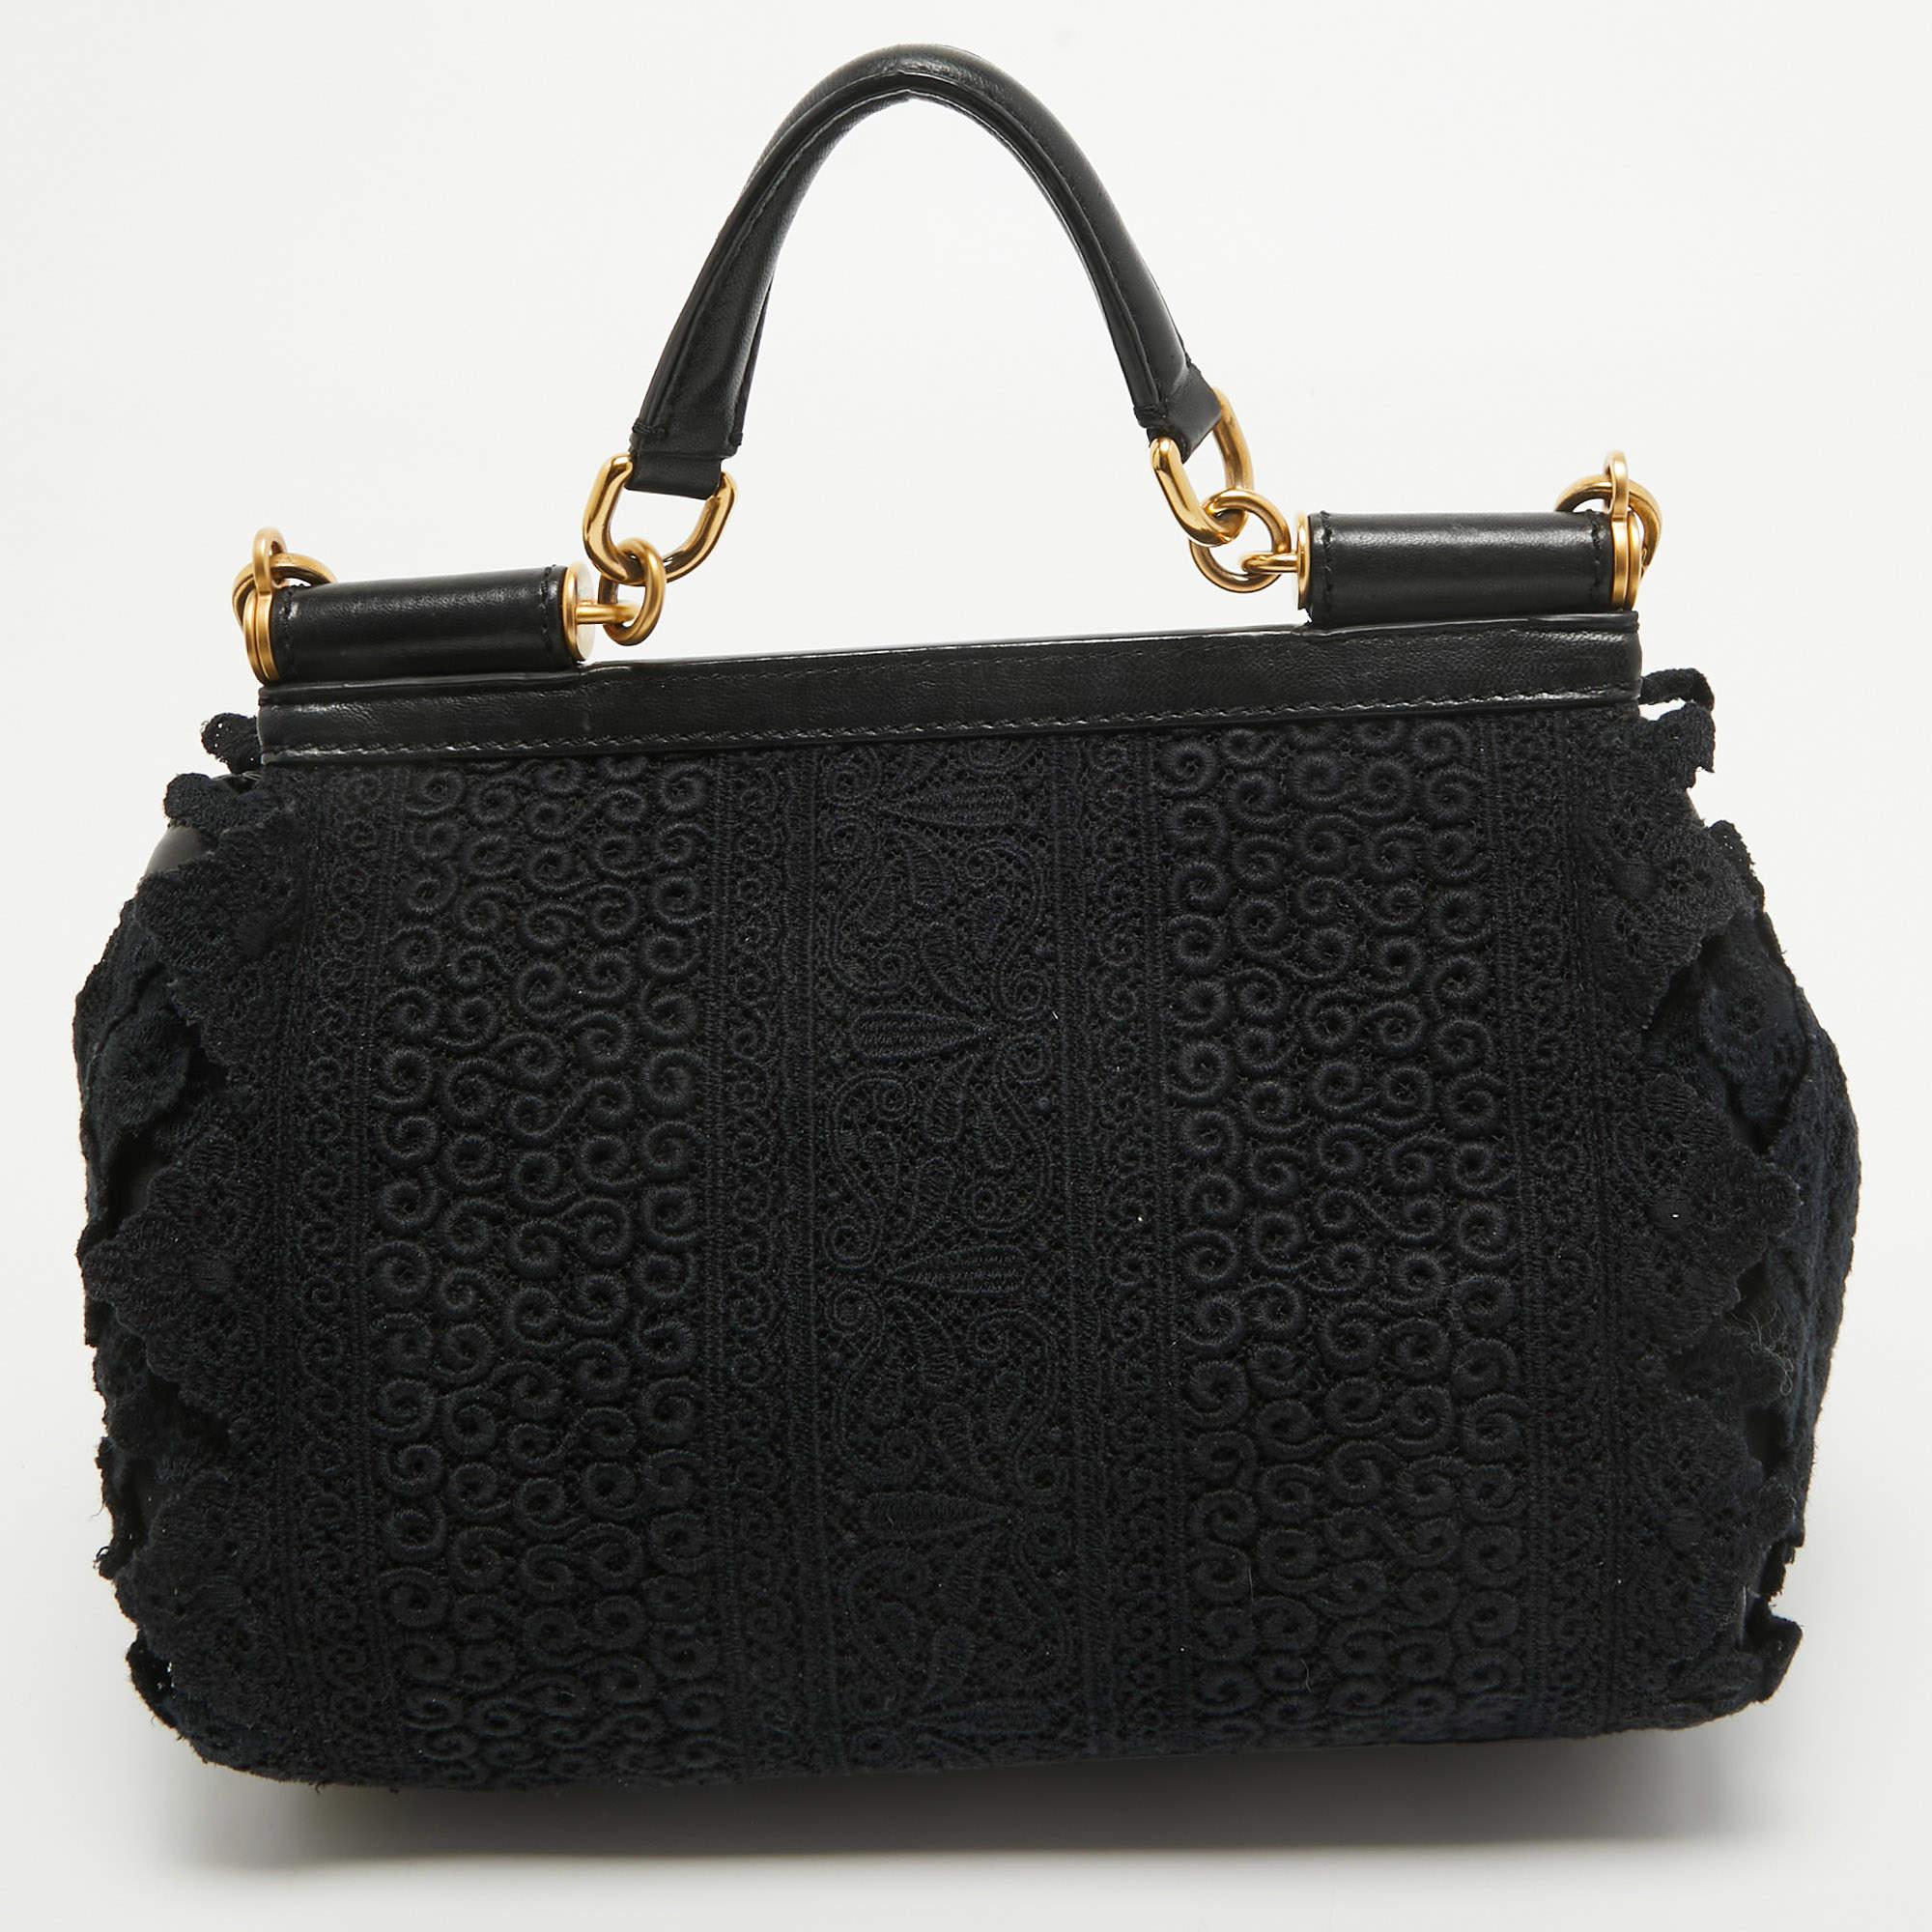 Dolce & Gabbana Black Crochet and Leather Medium Miss Sicily Top Handle Bag For Sale 2